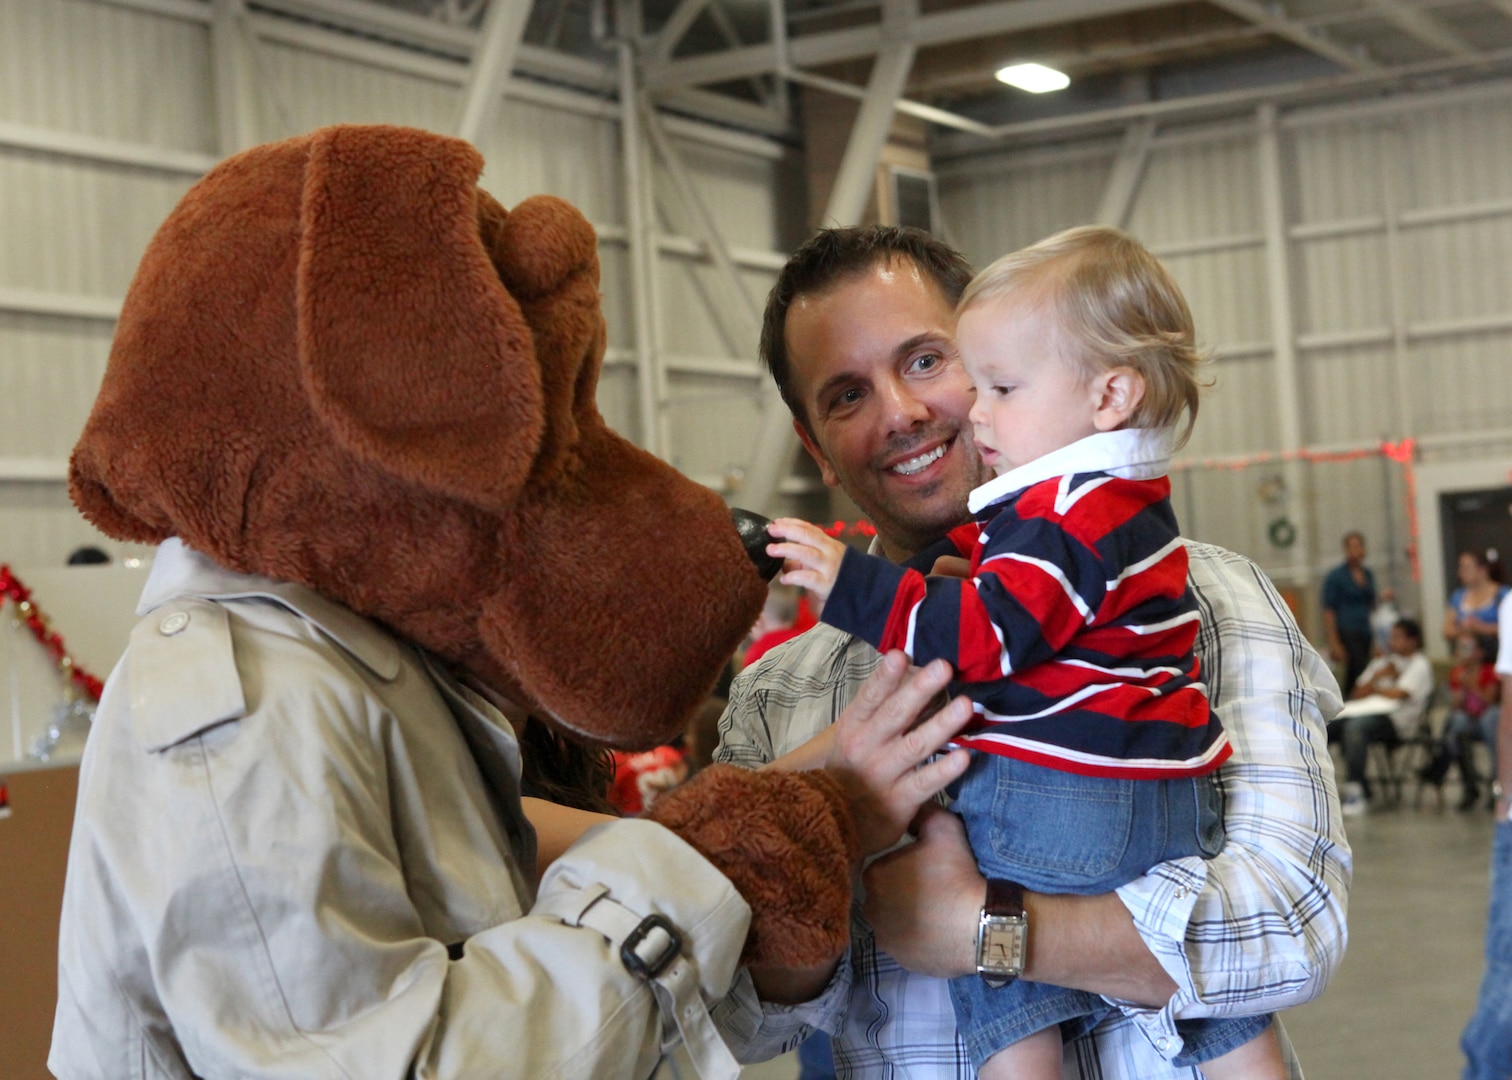 McGruff the Crime Dog greets James Shappell, a civilian employee with the 344th Training Squadron, and his son, Josh, during the Lackland Children's Holiday Party. The base-wide event was held Dec. 4 at the 344th TRS. (U.S. Air Force photo/Robbin Cresswell)